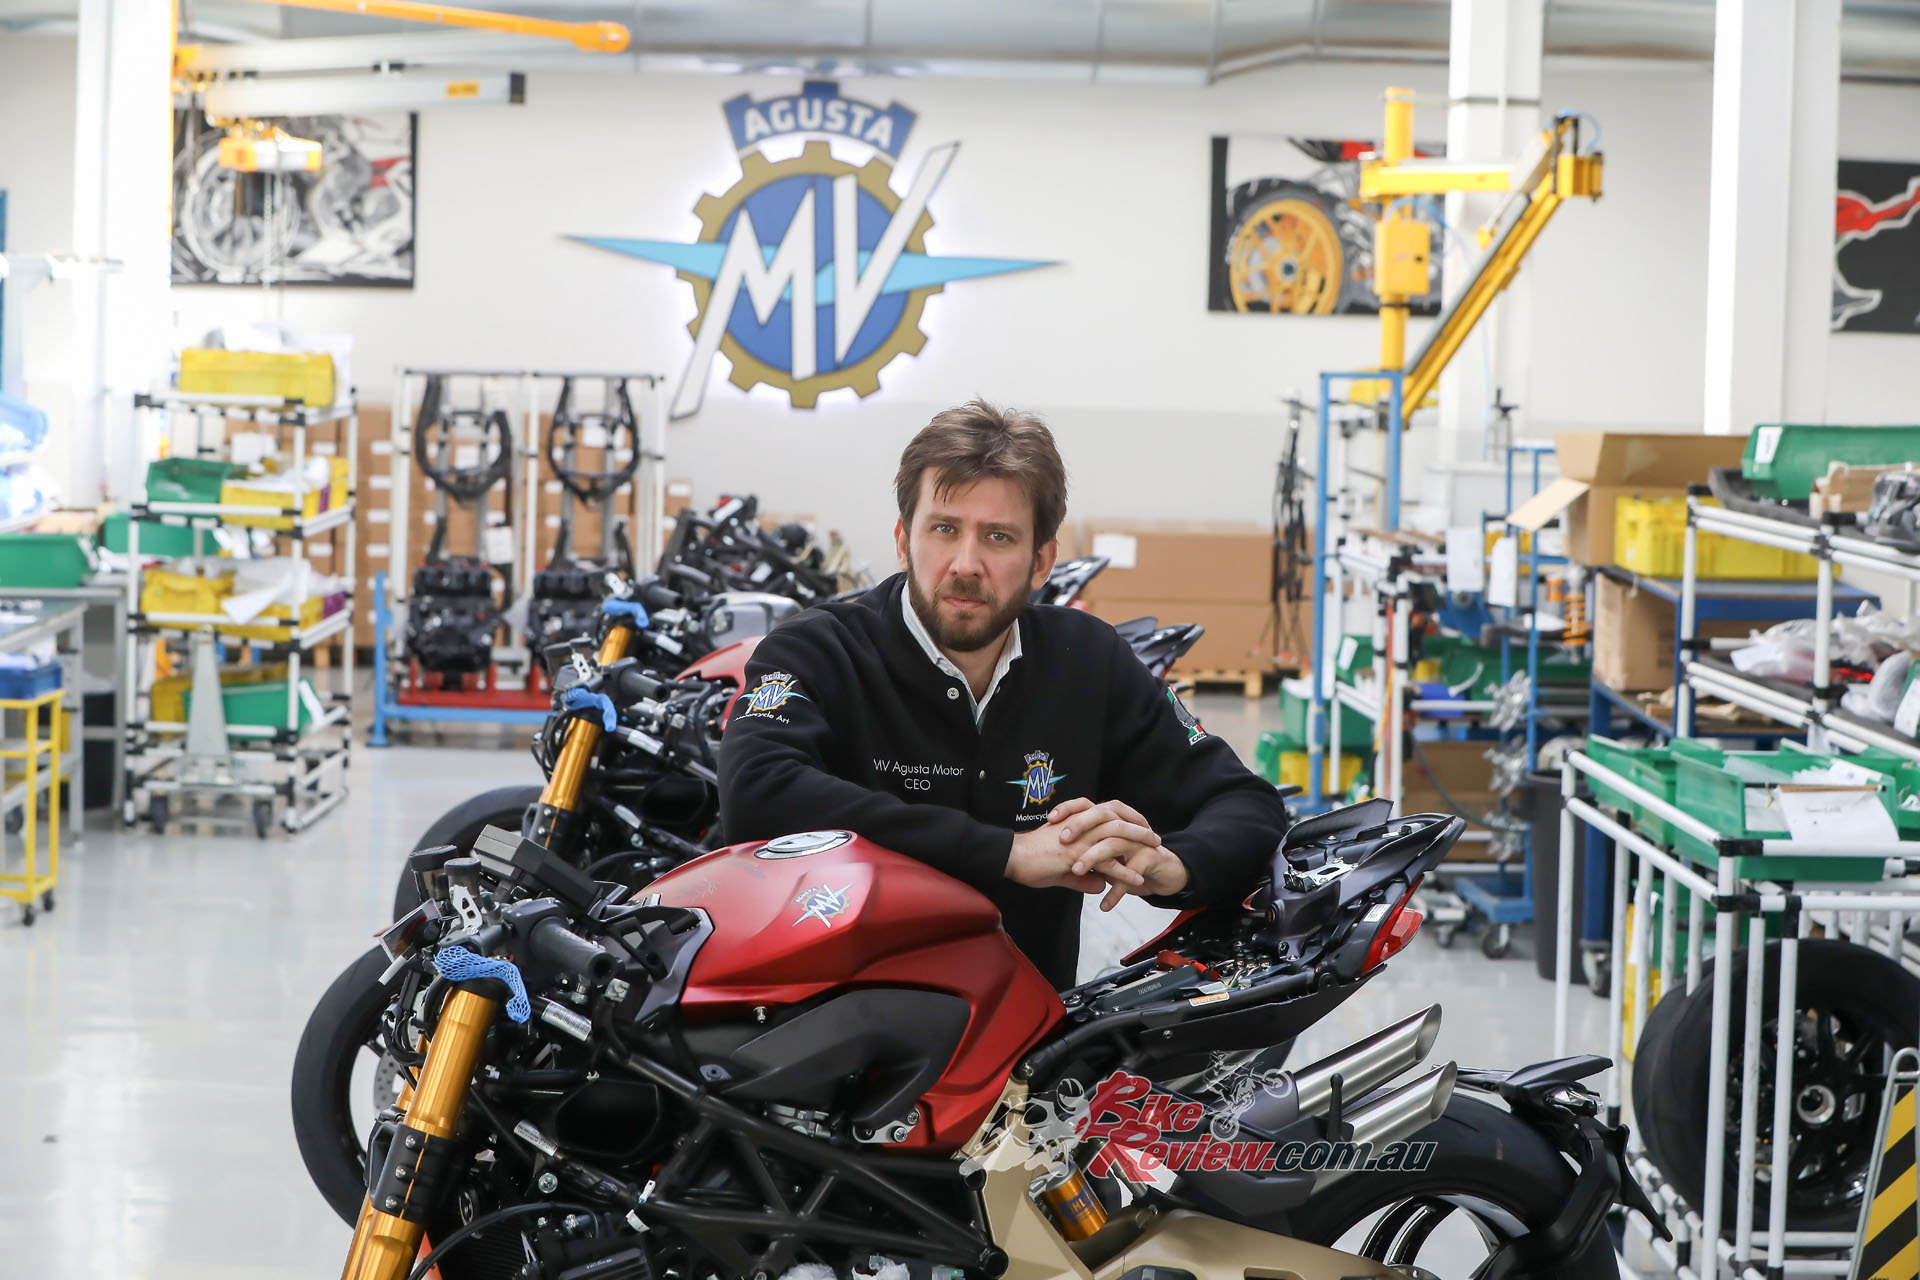 In November 2016, Timur Sardarov began making a series of investments in MV which resulted in his purchasing Mercedes-AMG’s 25 per cent equity in 2017, and by 2019 obtaining 100 per cent ownership of MV Agusta from Giovanni Castiglioni.